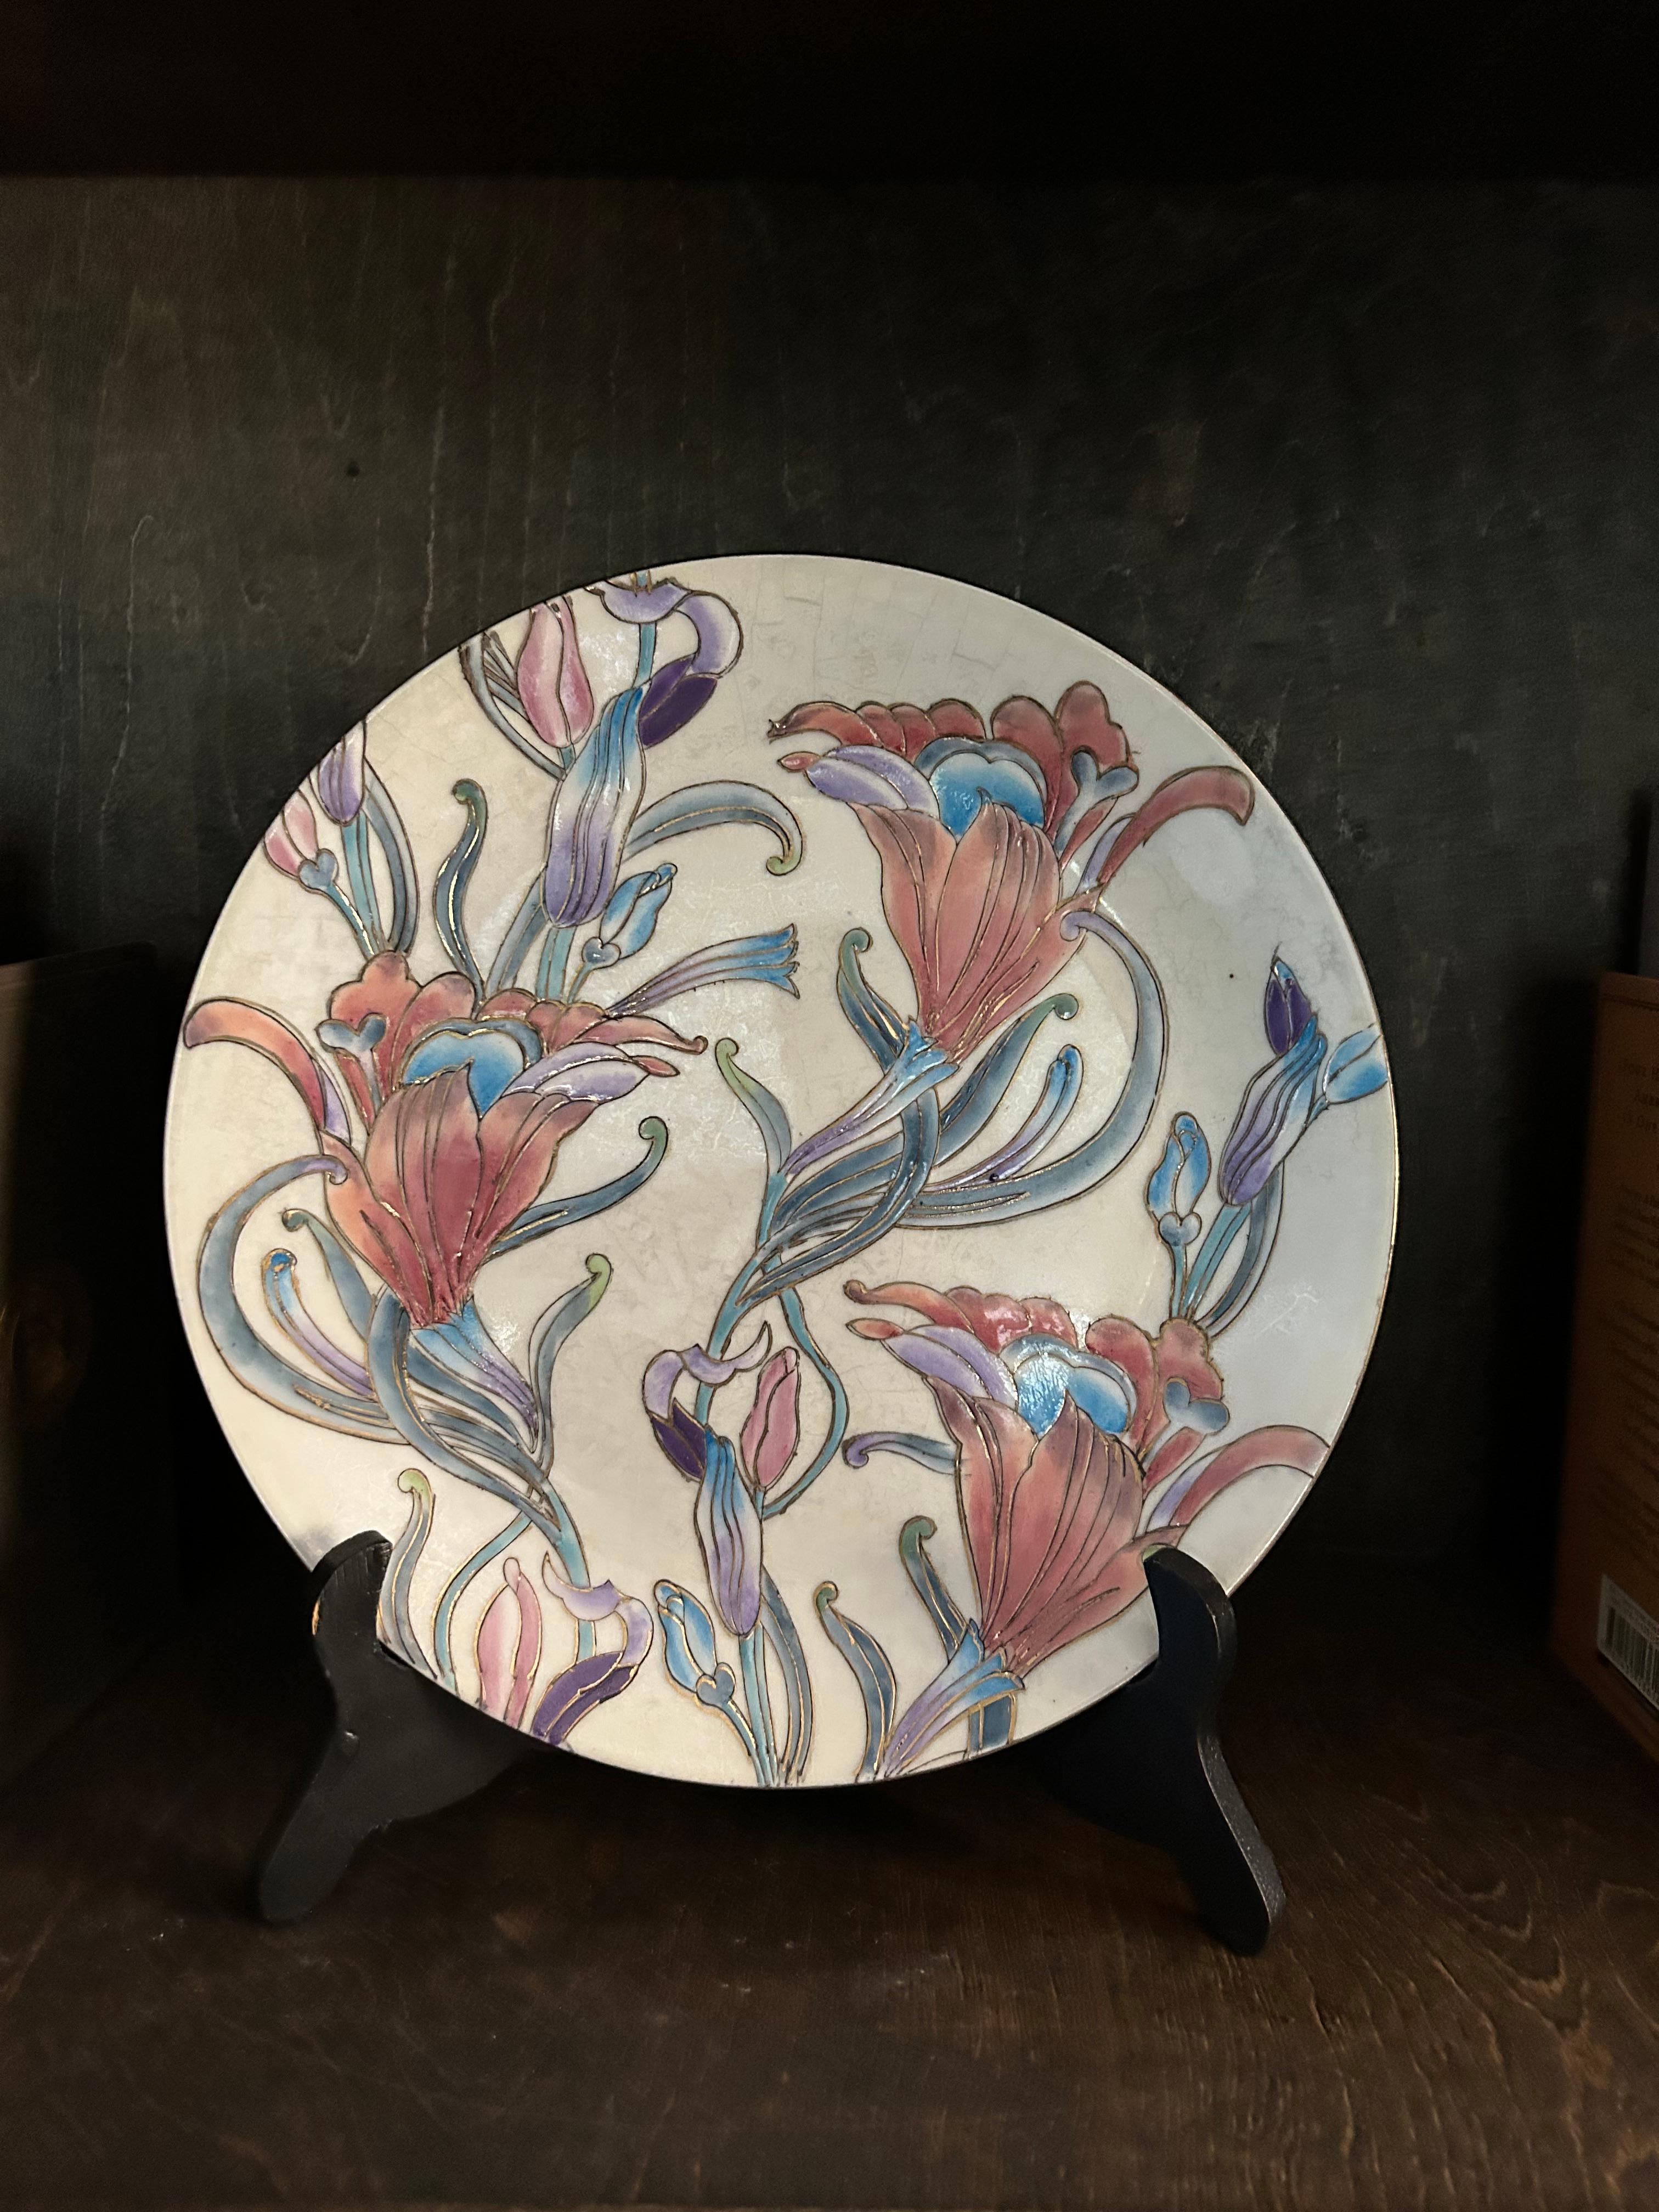 Beautiful Vintage Toyo Hand Painted Floral procelain Decorative Small Plate. It does come with a stand. This piece is only for decorative purposes. It has been kept in really good condition, there are no breaks or chips. See pictures. Add this to